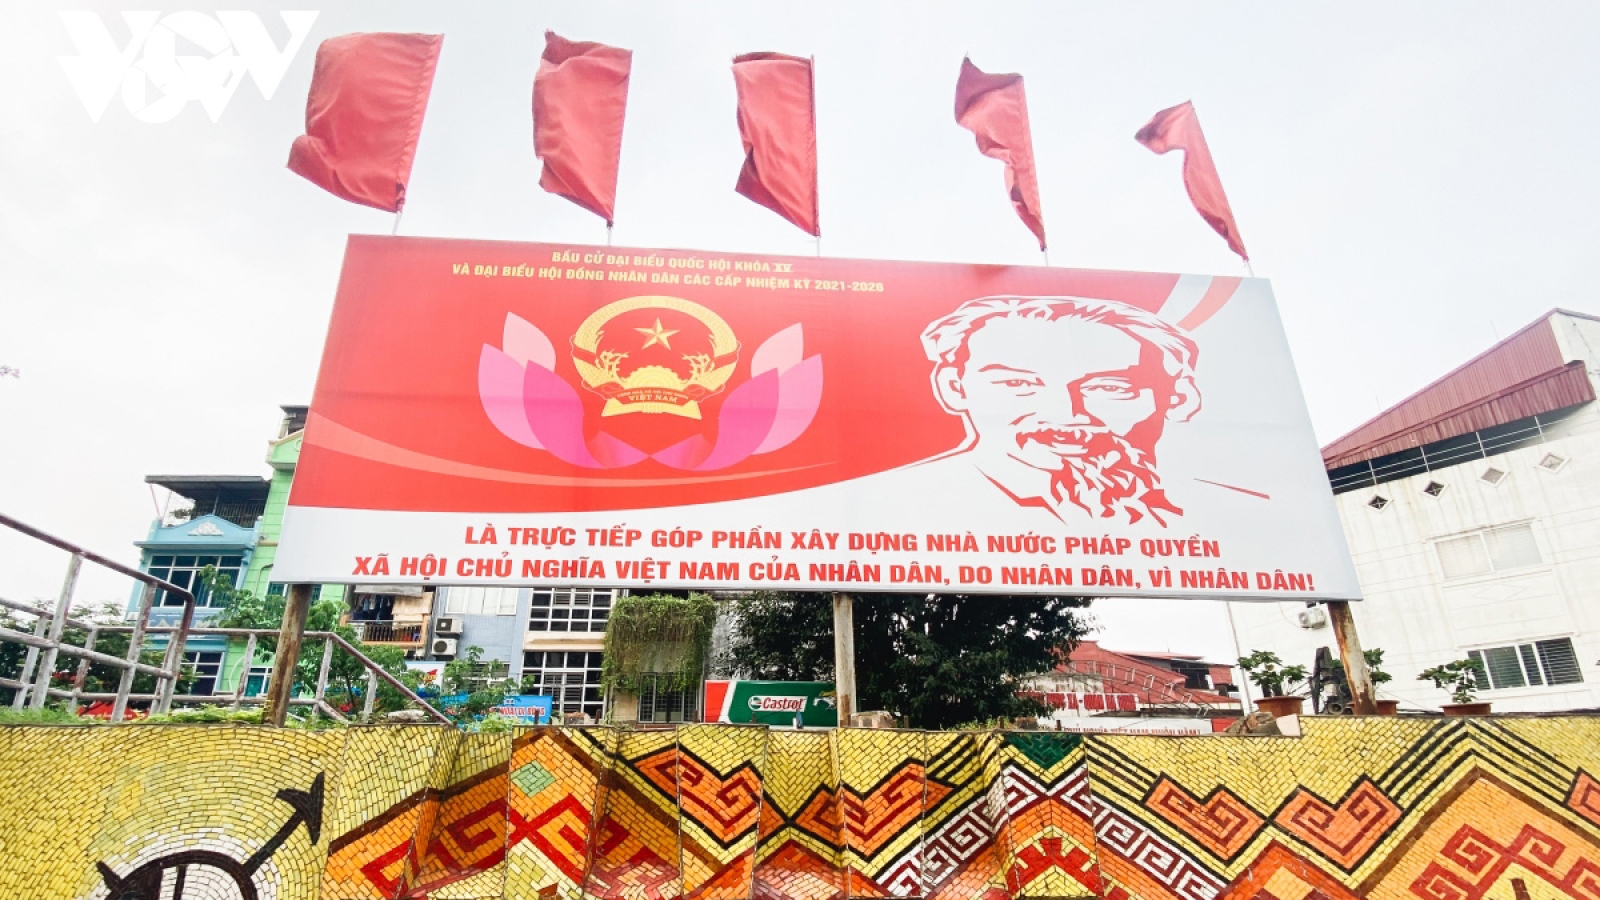 Flags and banners go on display in Hanoi ahead of national election day